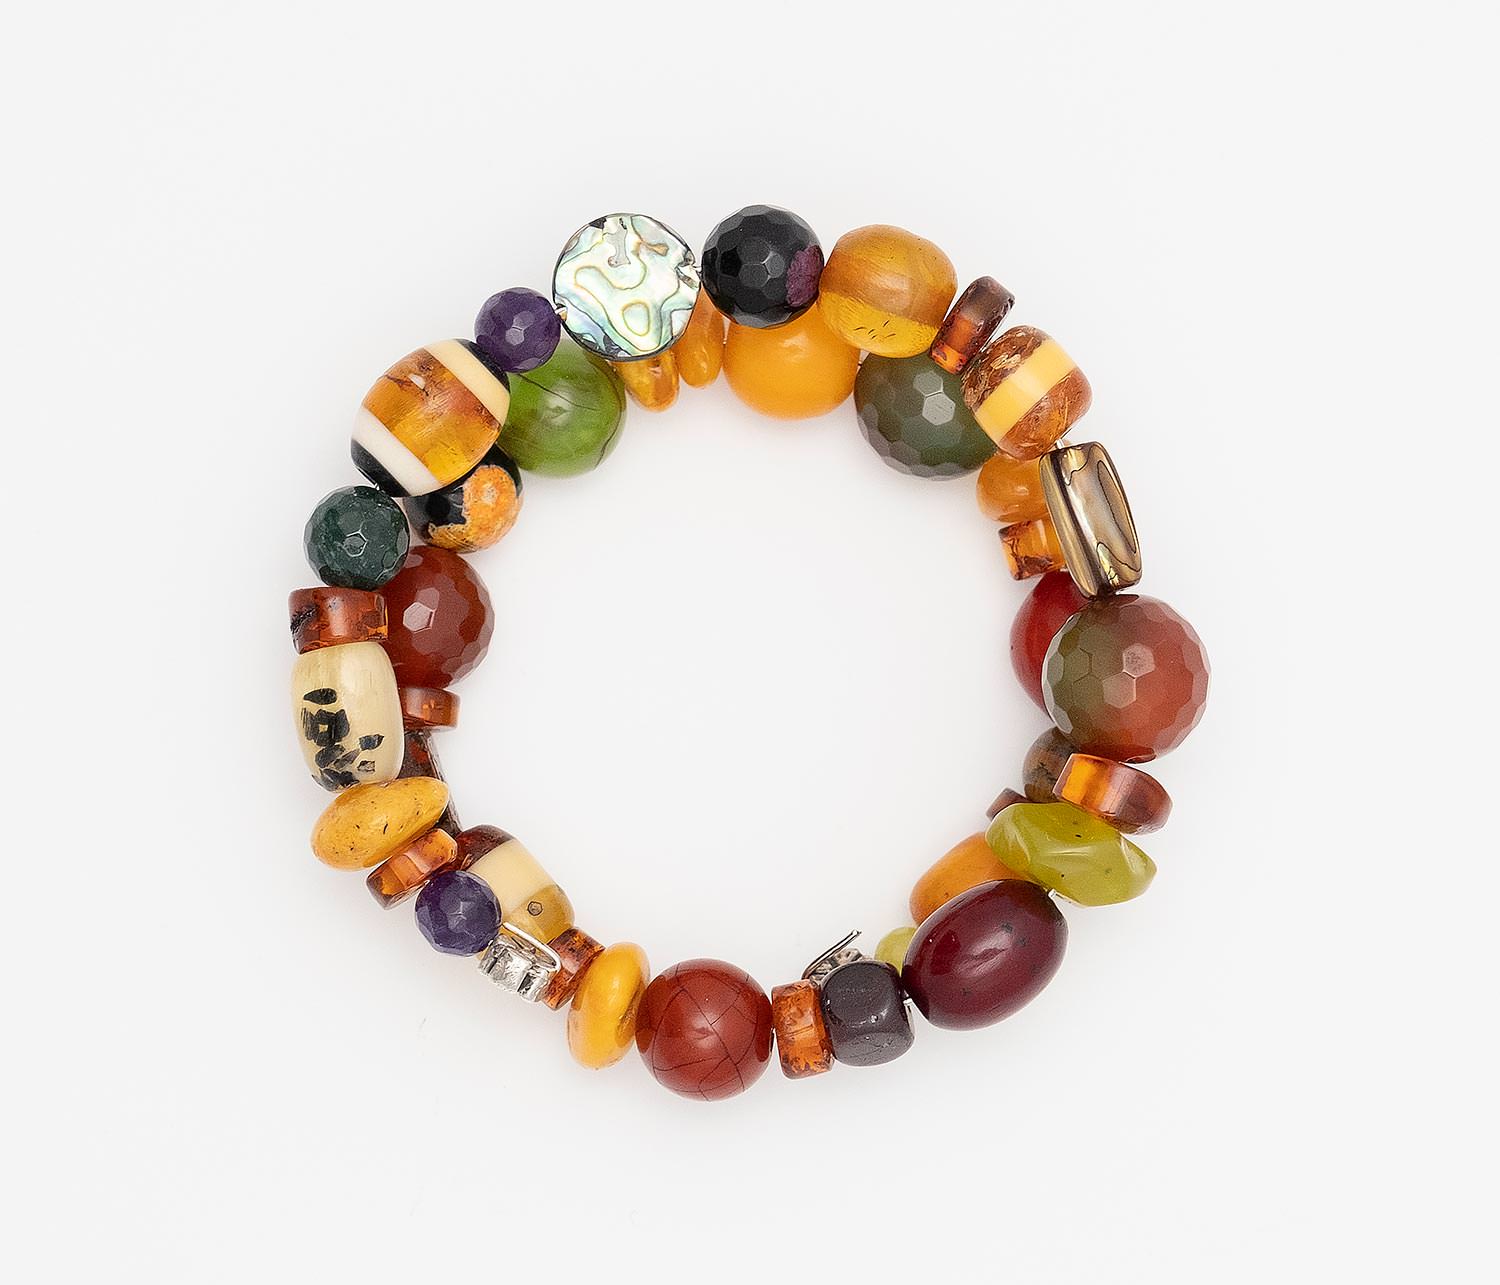 Bracelet with beads made of old mixture of artificial resins of Egypt (1960), Baltic Sea Amber (cut by hand), Agates and tin
